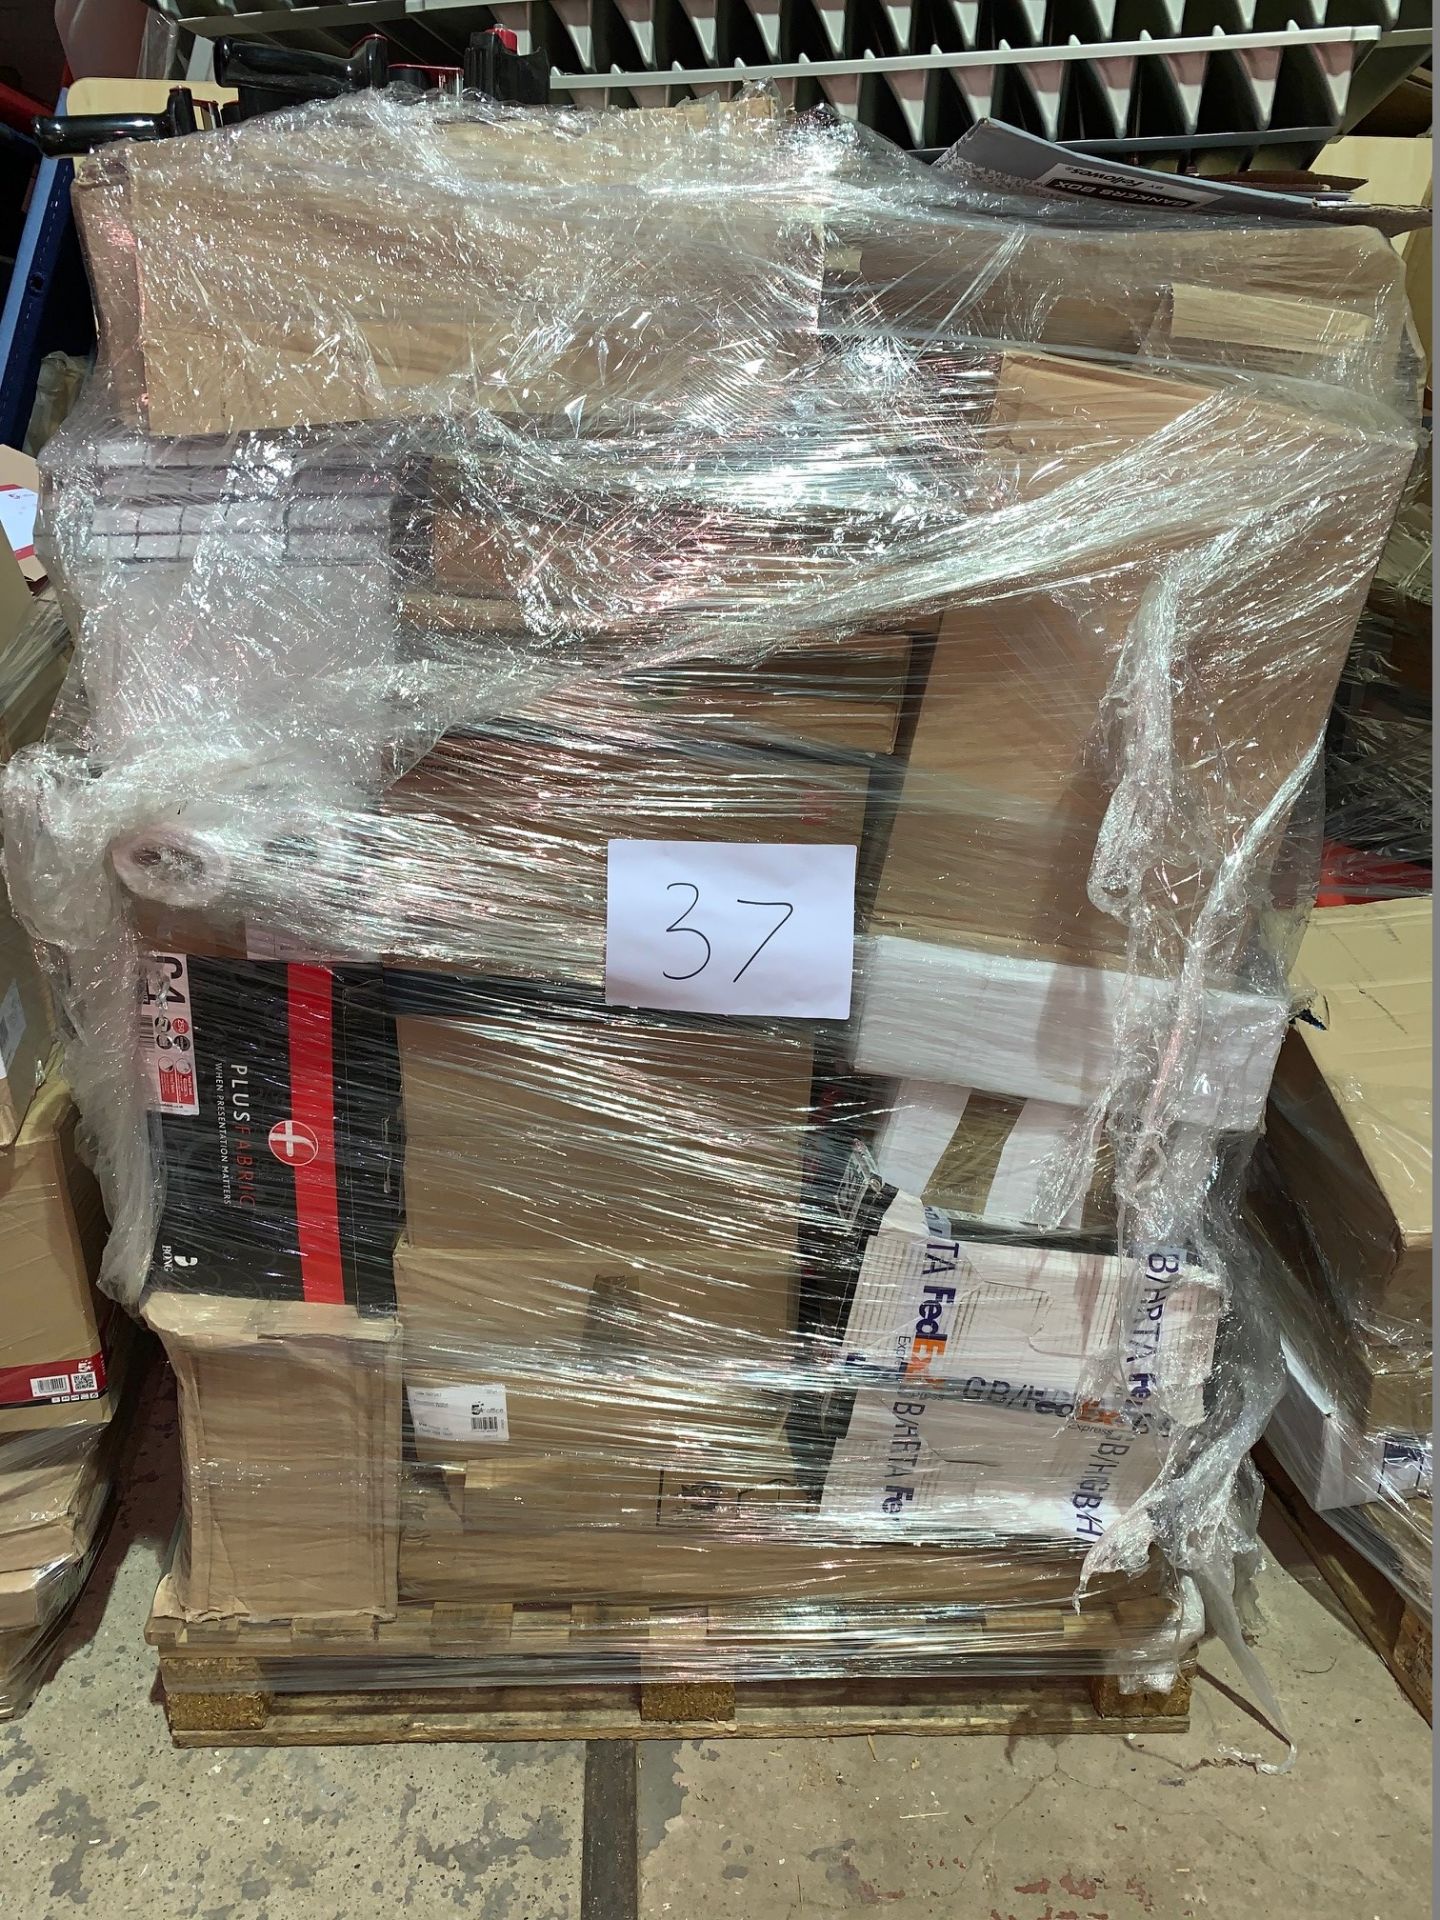 1 x Pallet of Mixed Stock/Stationery Including Paper, Archive Boxes, Lever Arch Files, Envelopes,